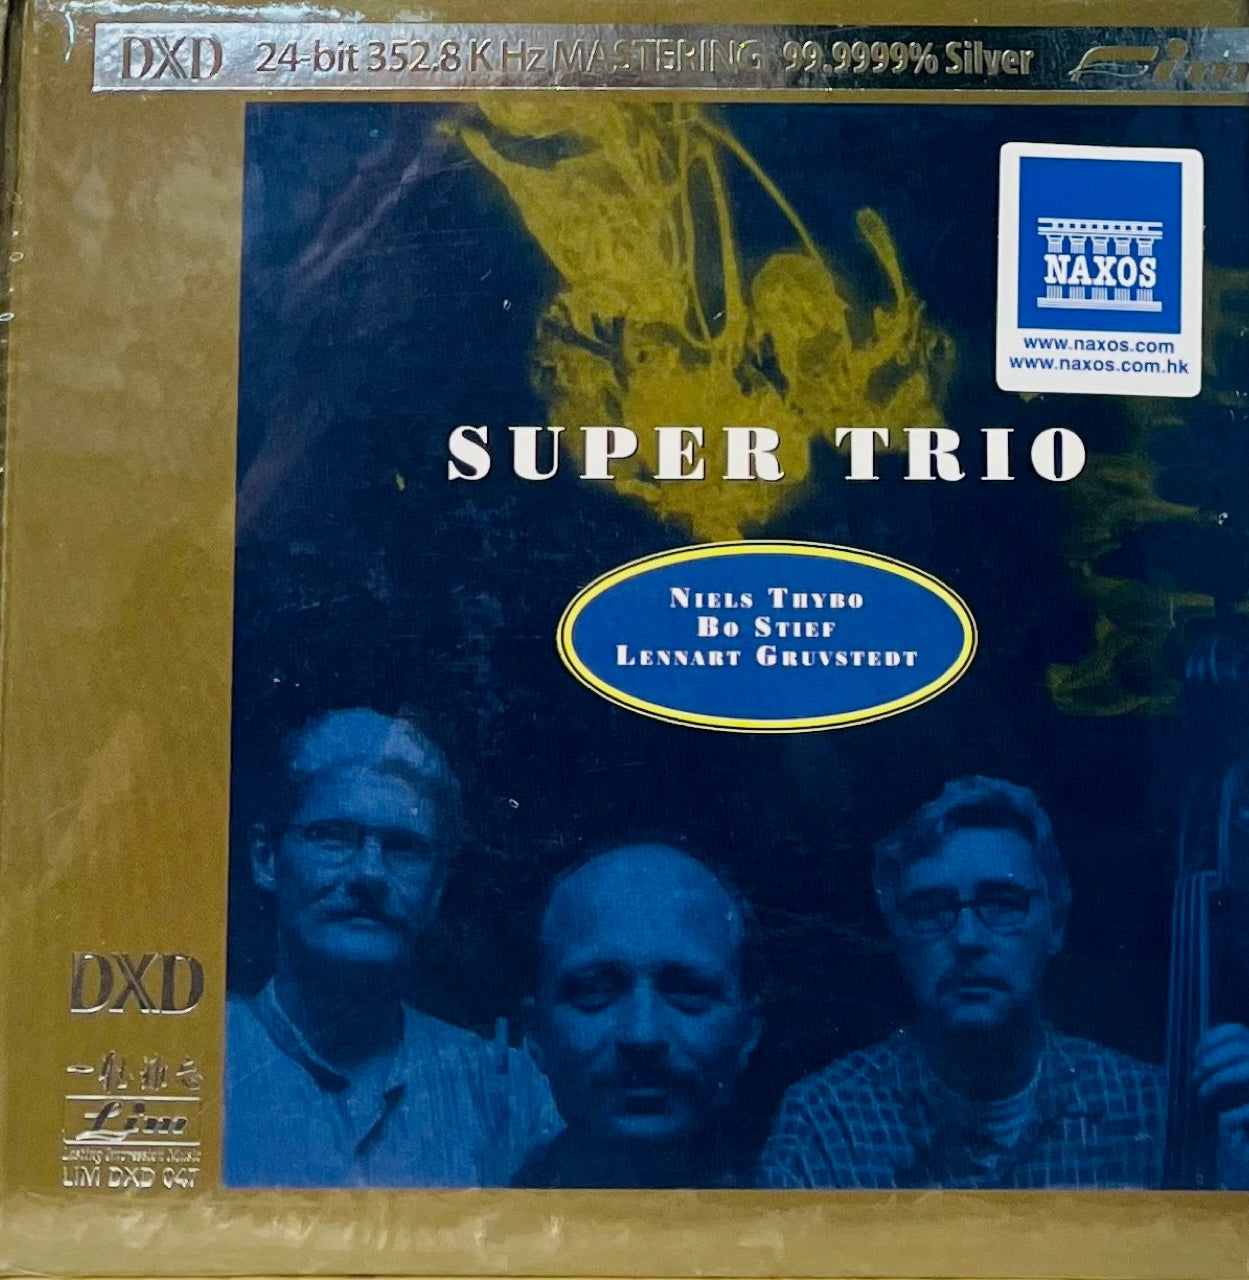 SUPER TRIO - NIELS THYBO, BO STIEF, LENNANT GRUVSTEDT (DXD) CD MADE IN US